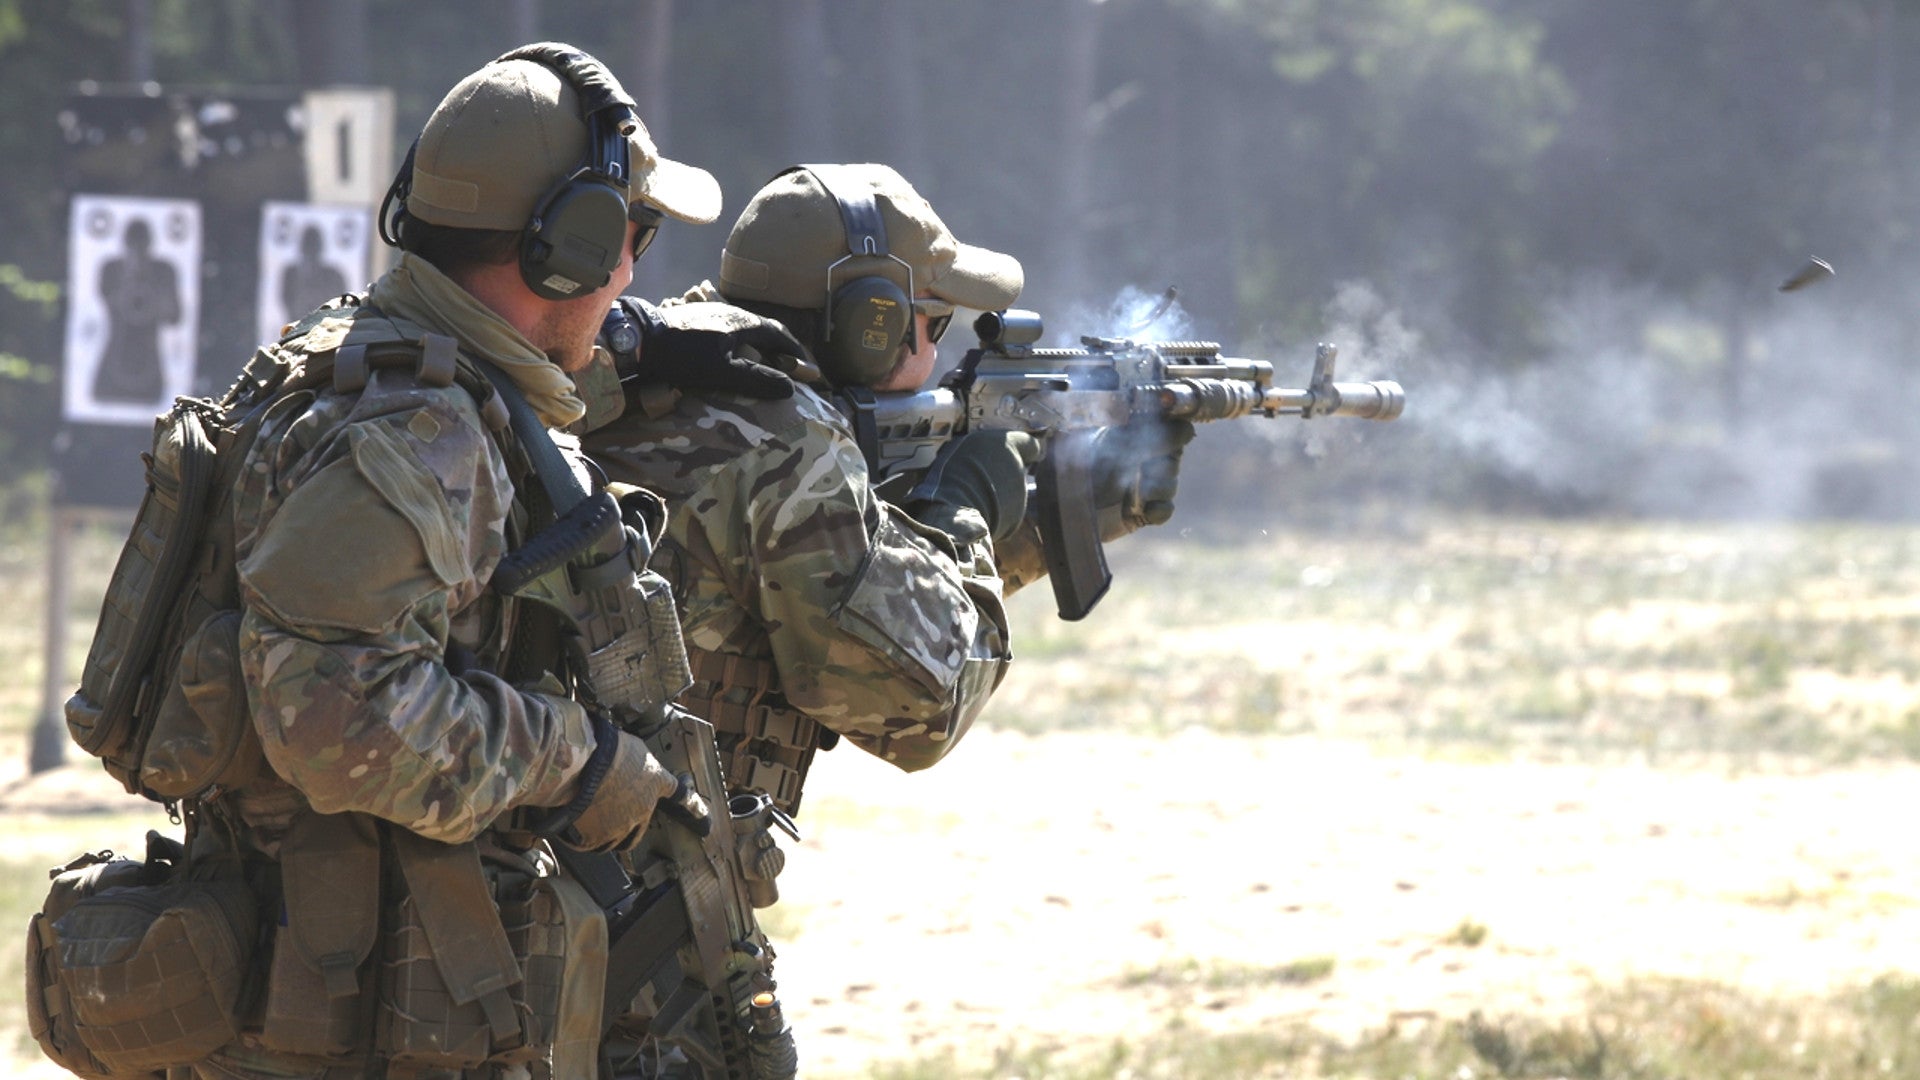 Ukrainian Spetnaz’s Weapons and Gear May Show an American Touch